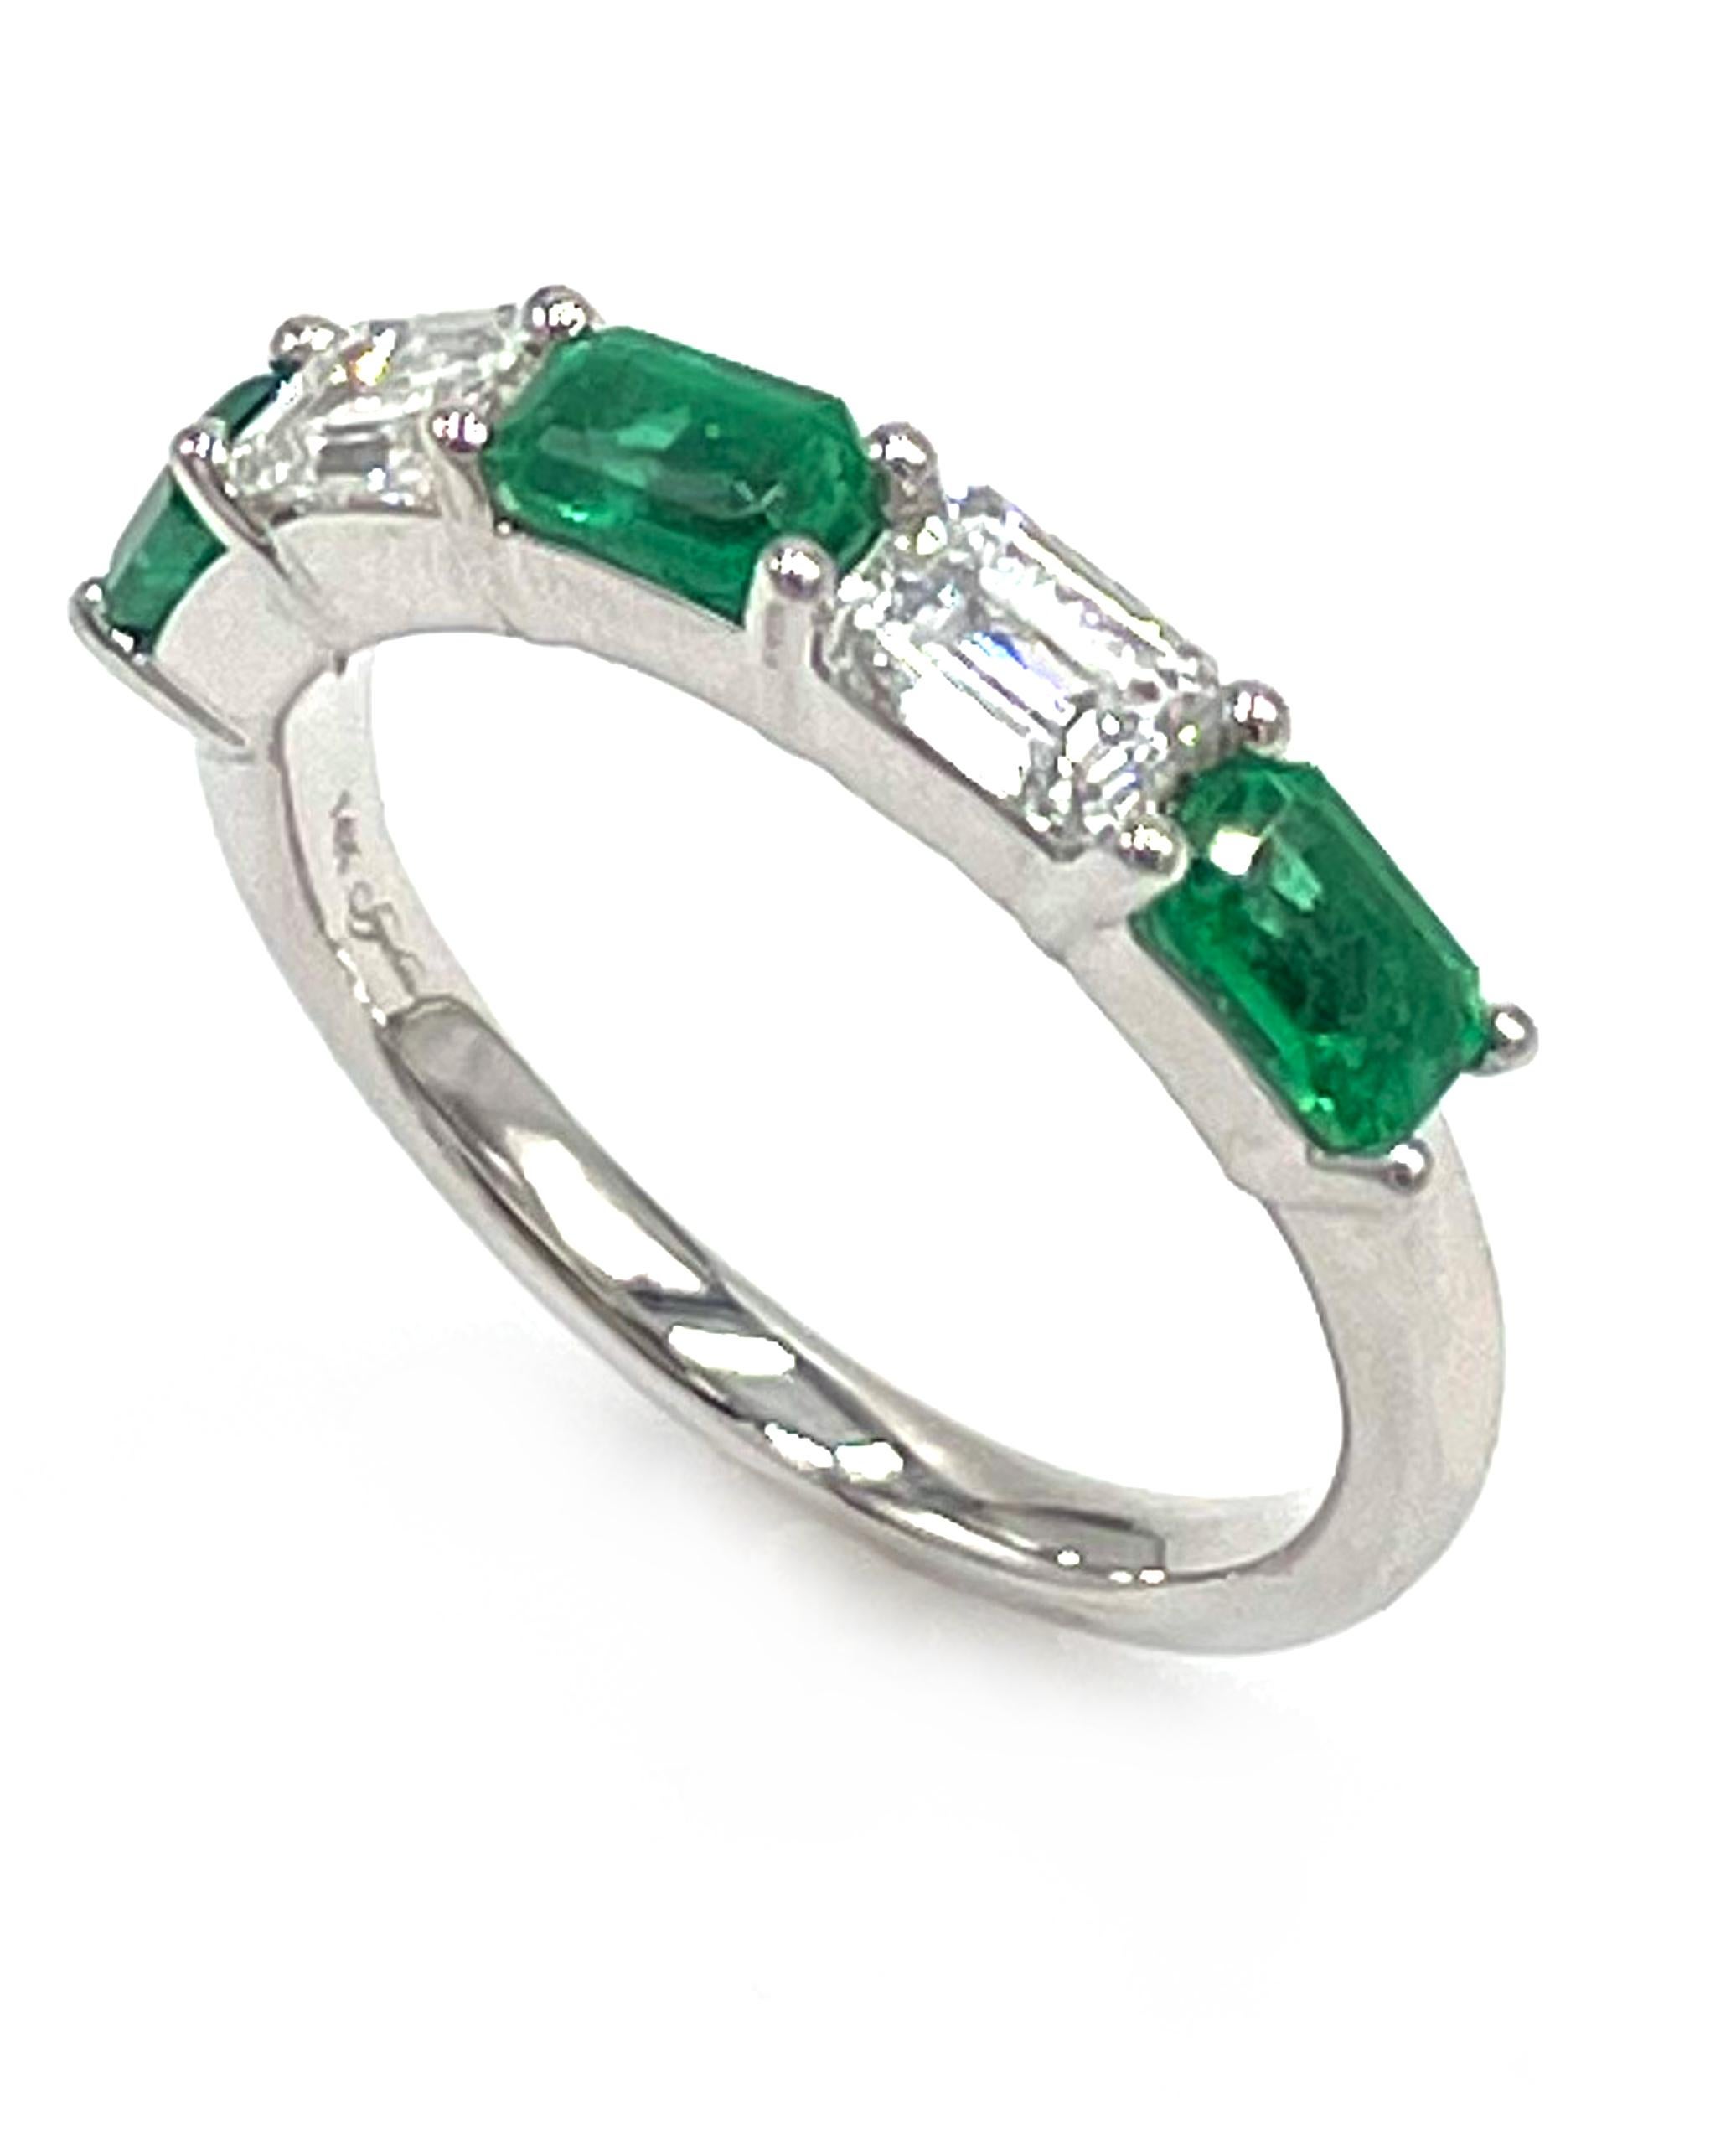 14K white gold ring with alternating emerald and diamond pattern.  The ring is set shared prong style with 3 emerald cut emeralds weighing 0.87 carats total and 2 emerald cut diamonds weighing 0.70 carats total. 

* The diamonds are F color, VVS